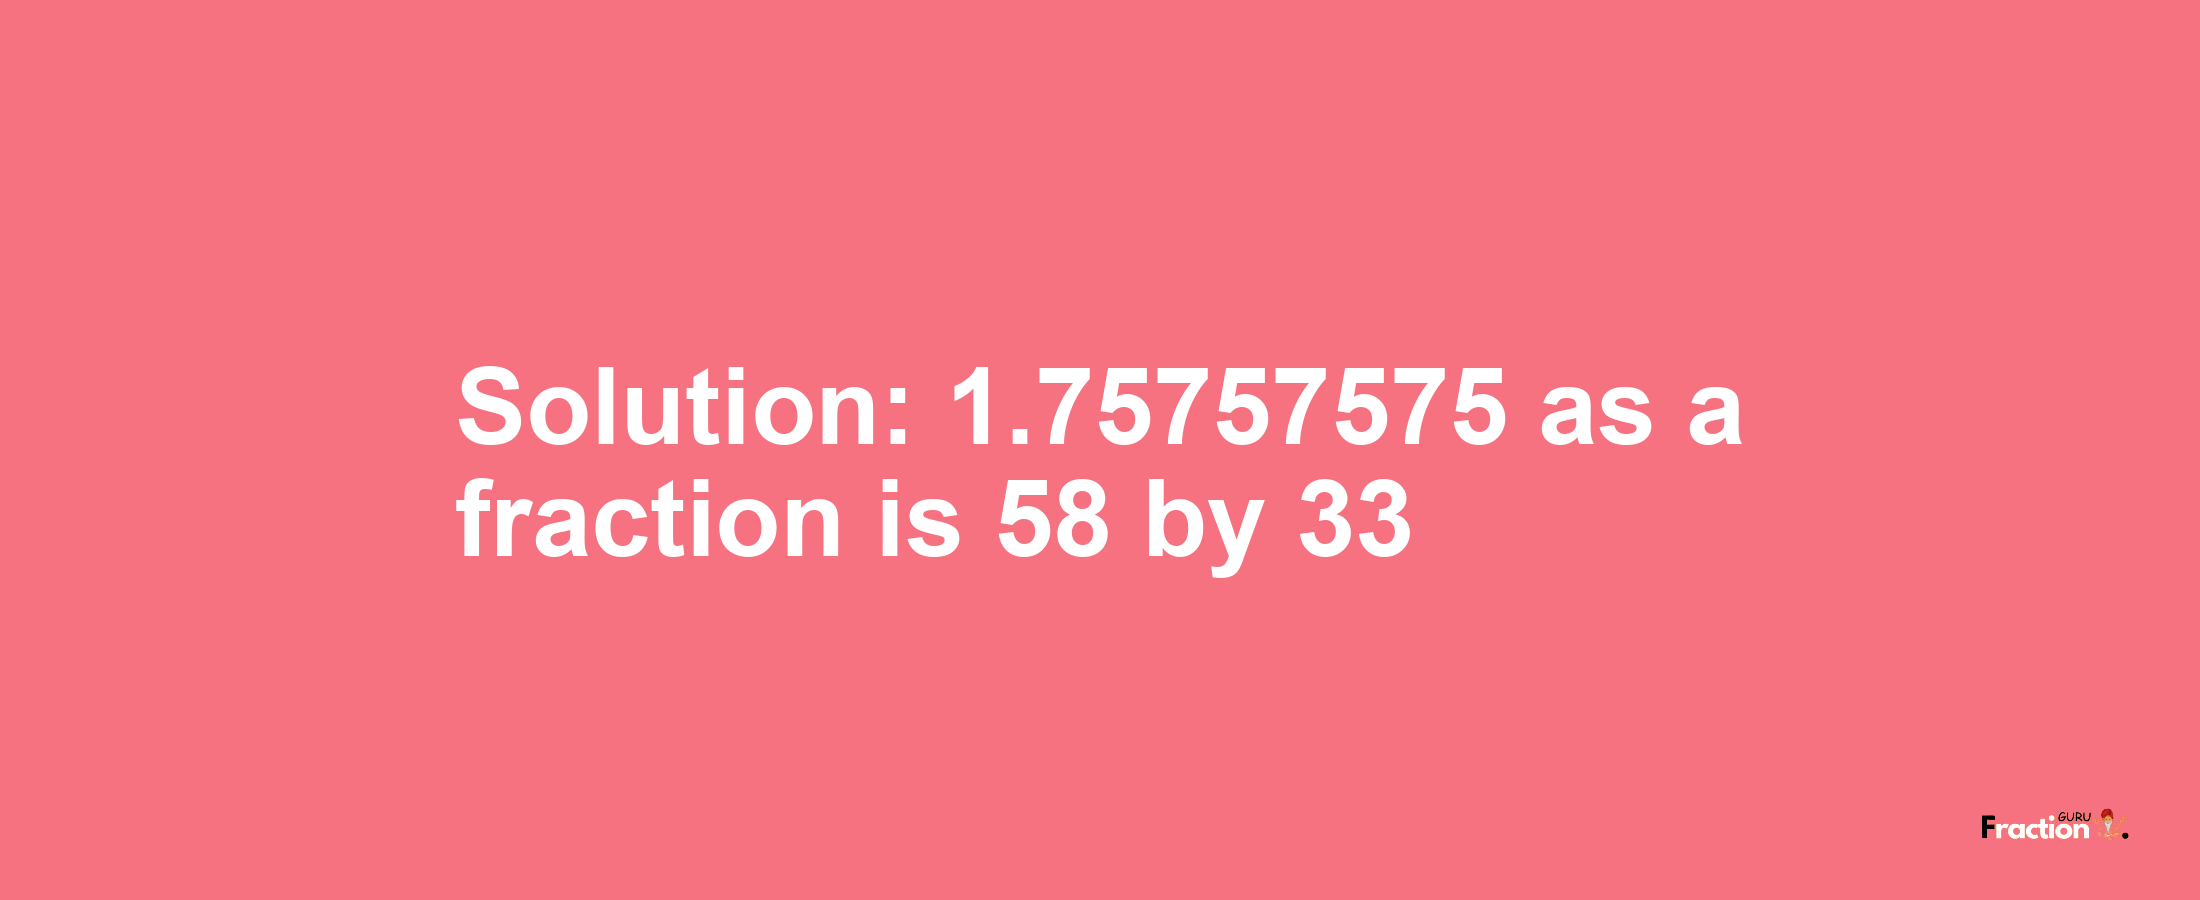 Solution:1.75757575 as a fraction is 58/33